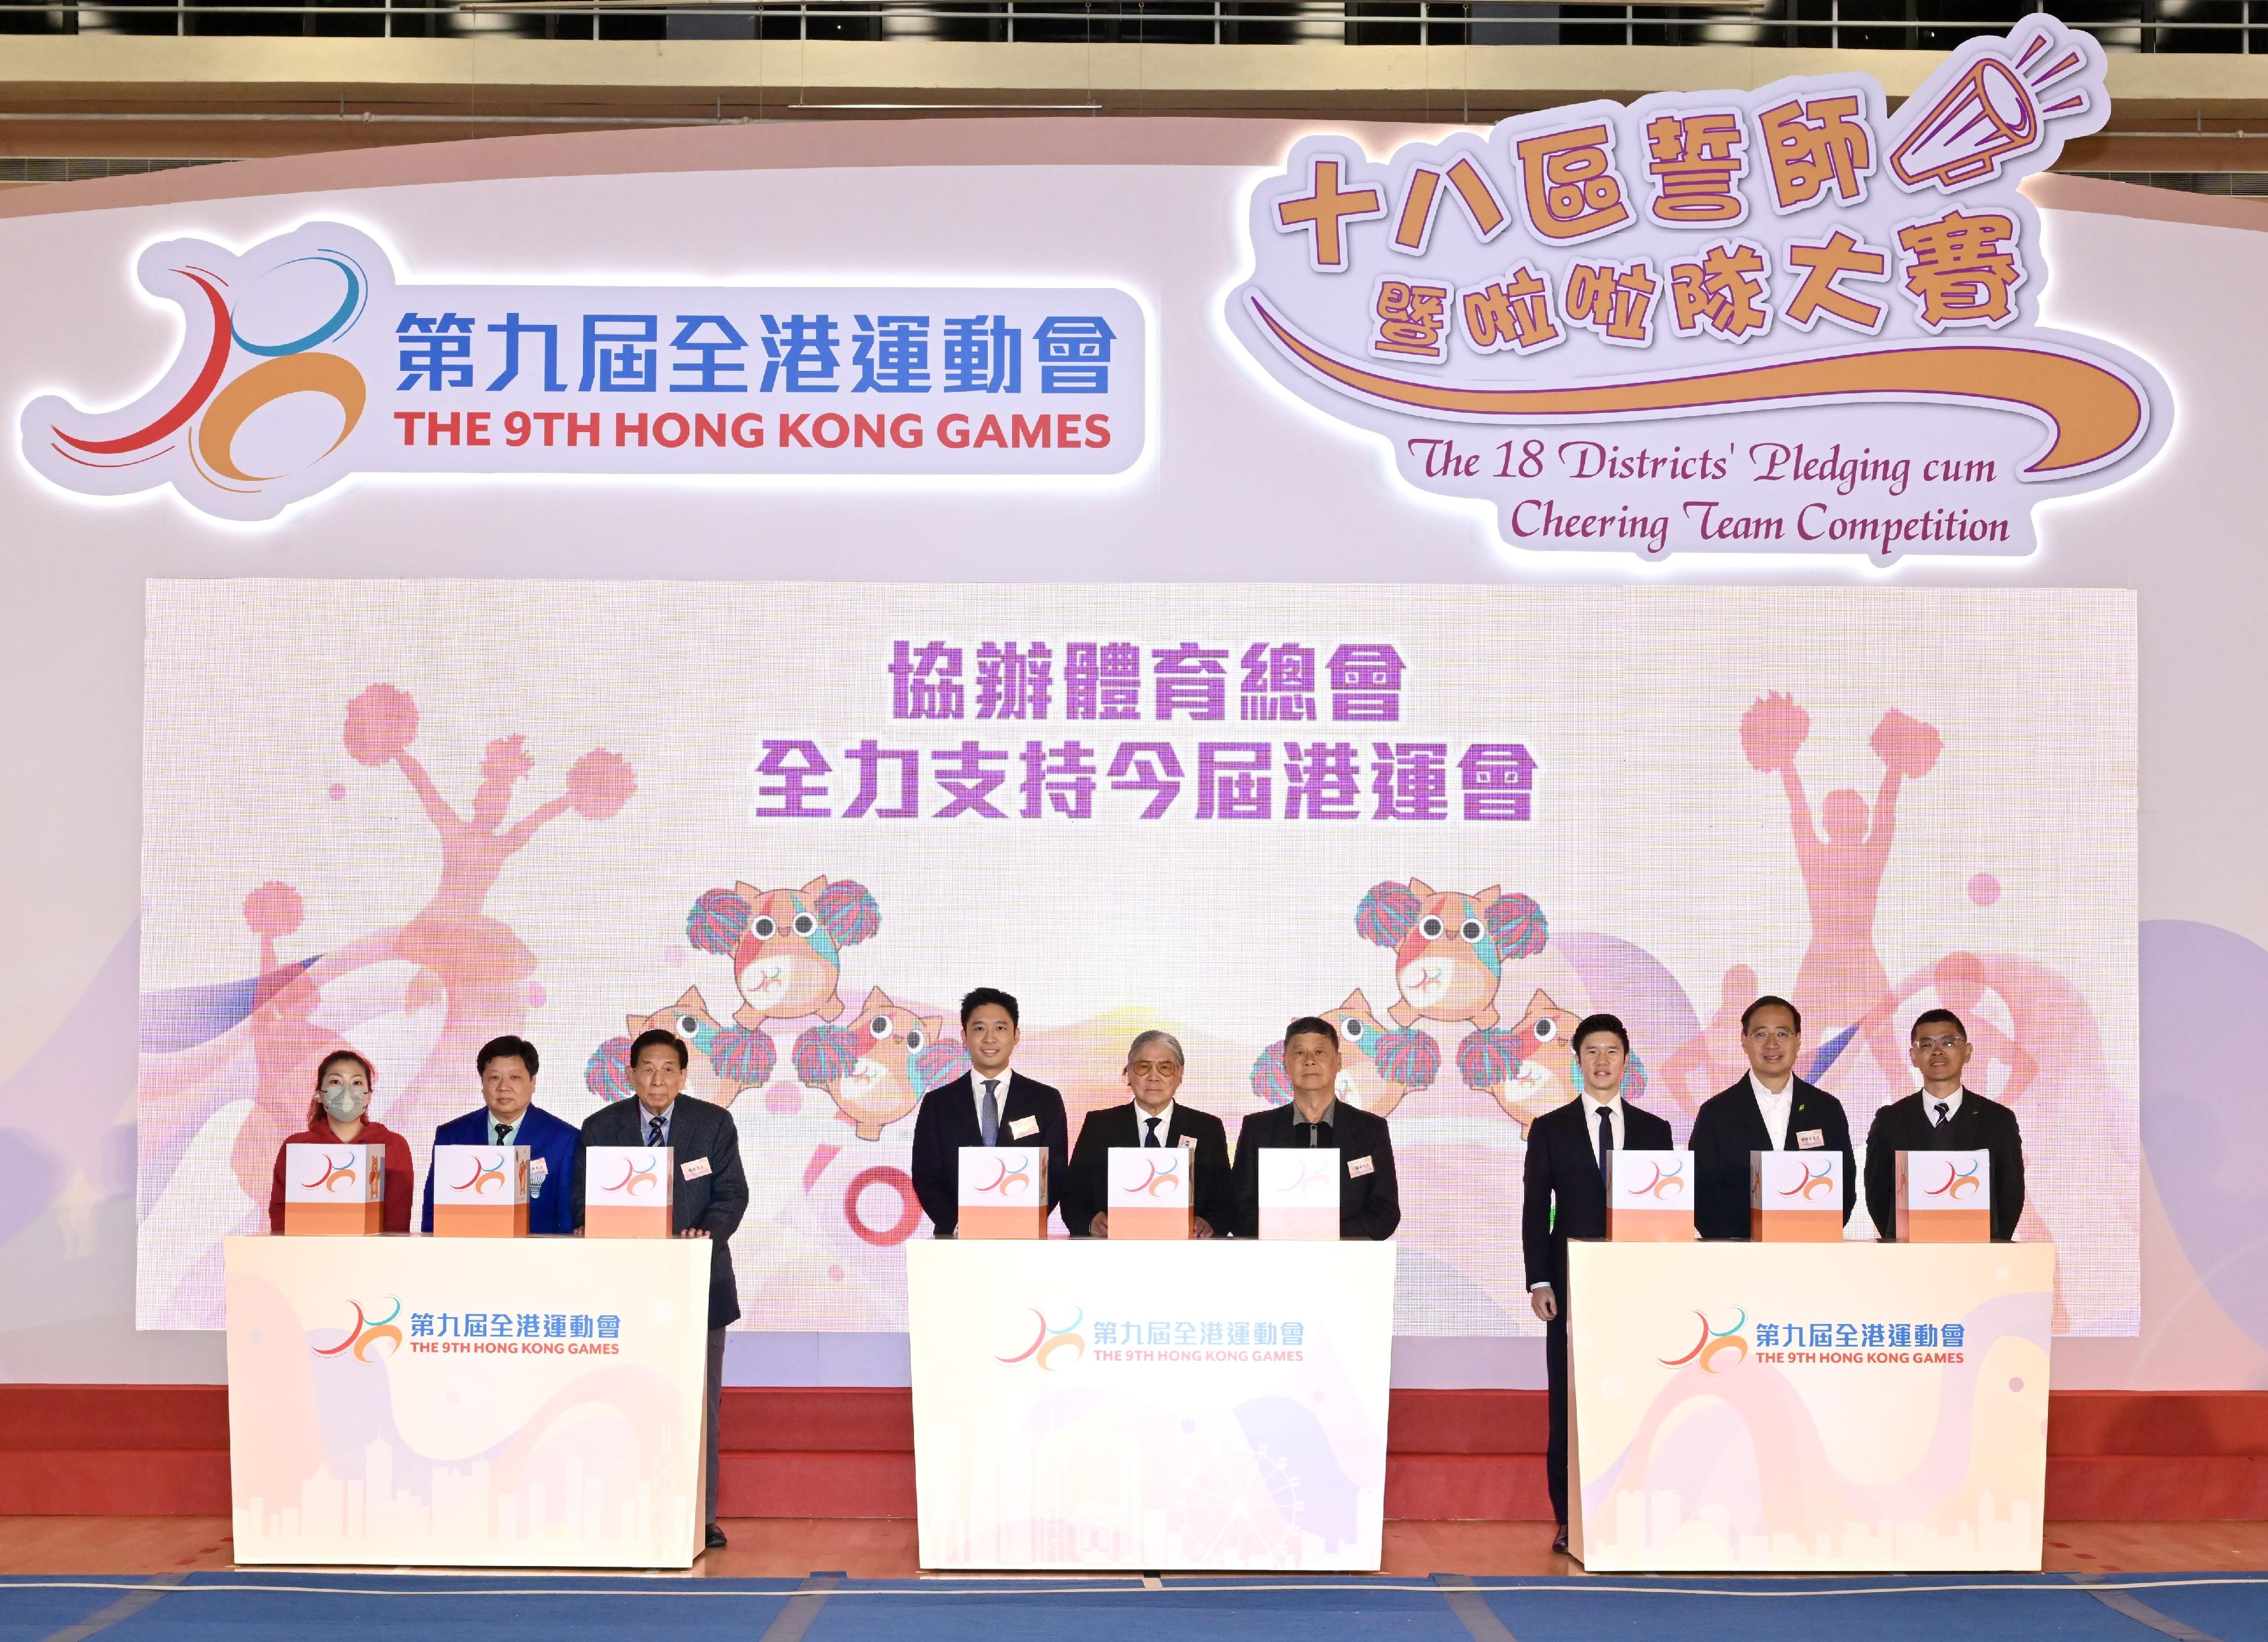 The President of the Sports Federation & Olympic Committee of Hong Kong, China, Mr Timothy Fok (centre), and representatives from eight National Sports Associations attend the 18 Districts' Pledging cum Cheering Team Competition of the 9th Hong Kong Games (HKG) today (February 25), showing their full support for the HKG.